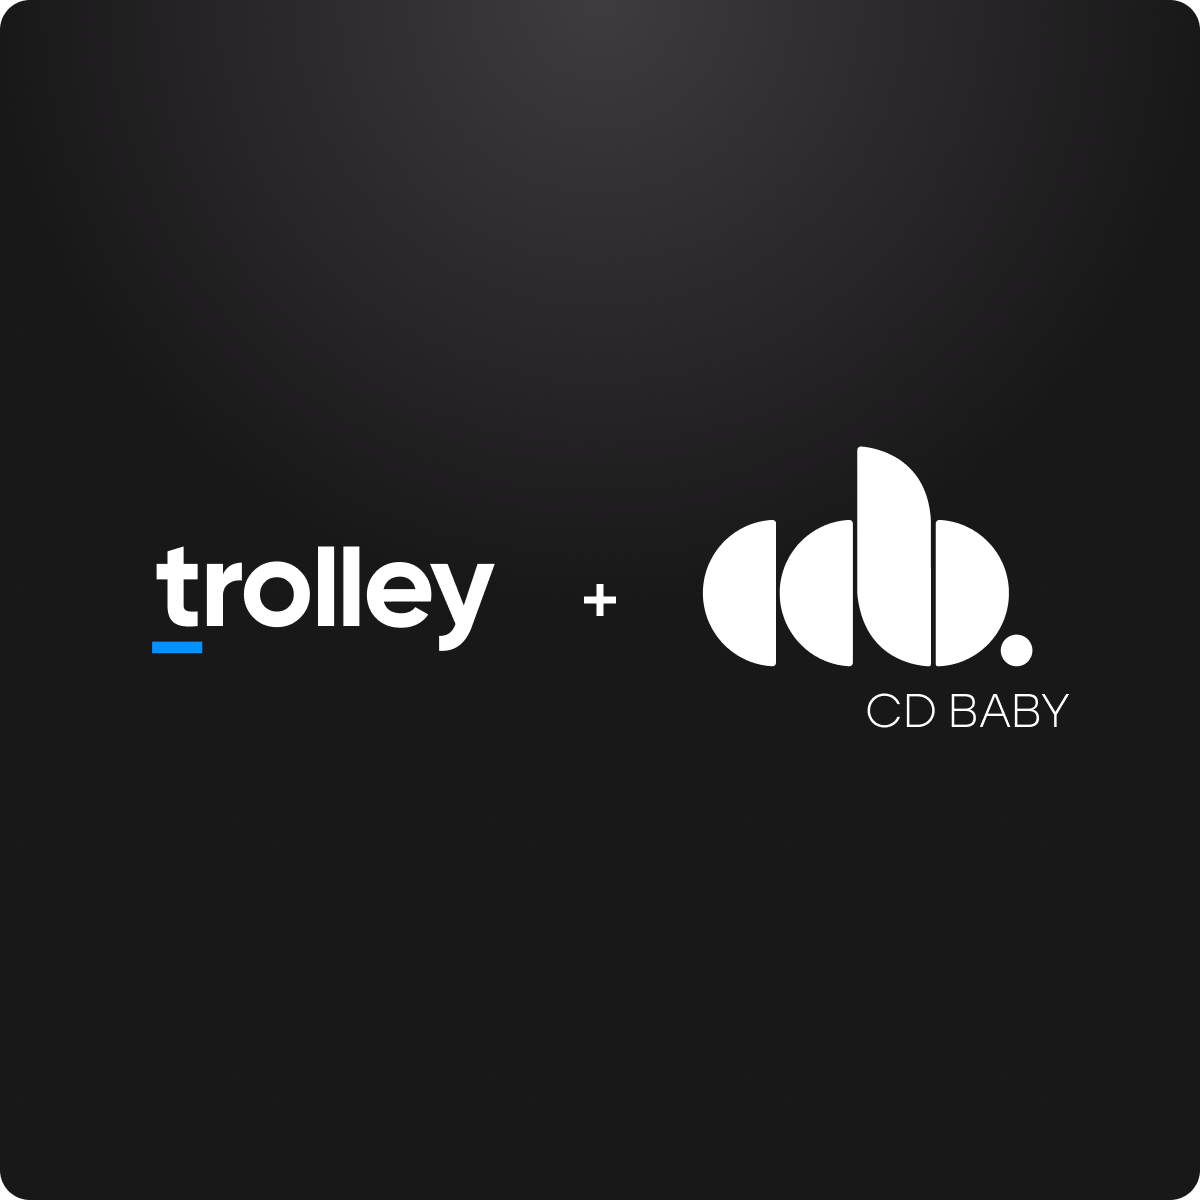 Trolley & CD Baby Logo Featured Image